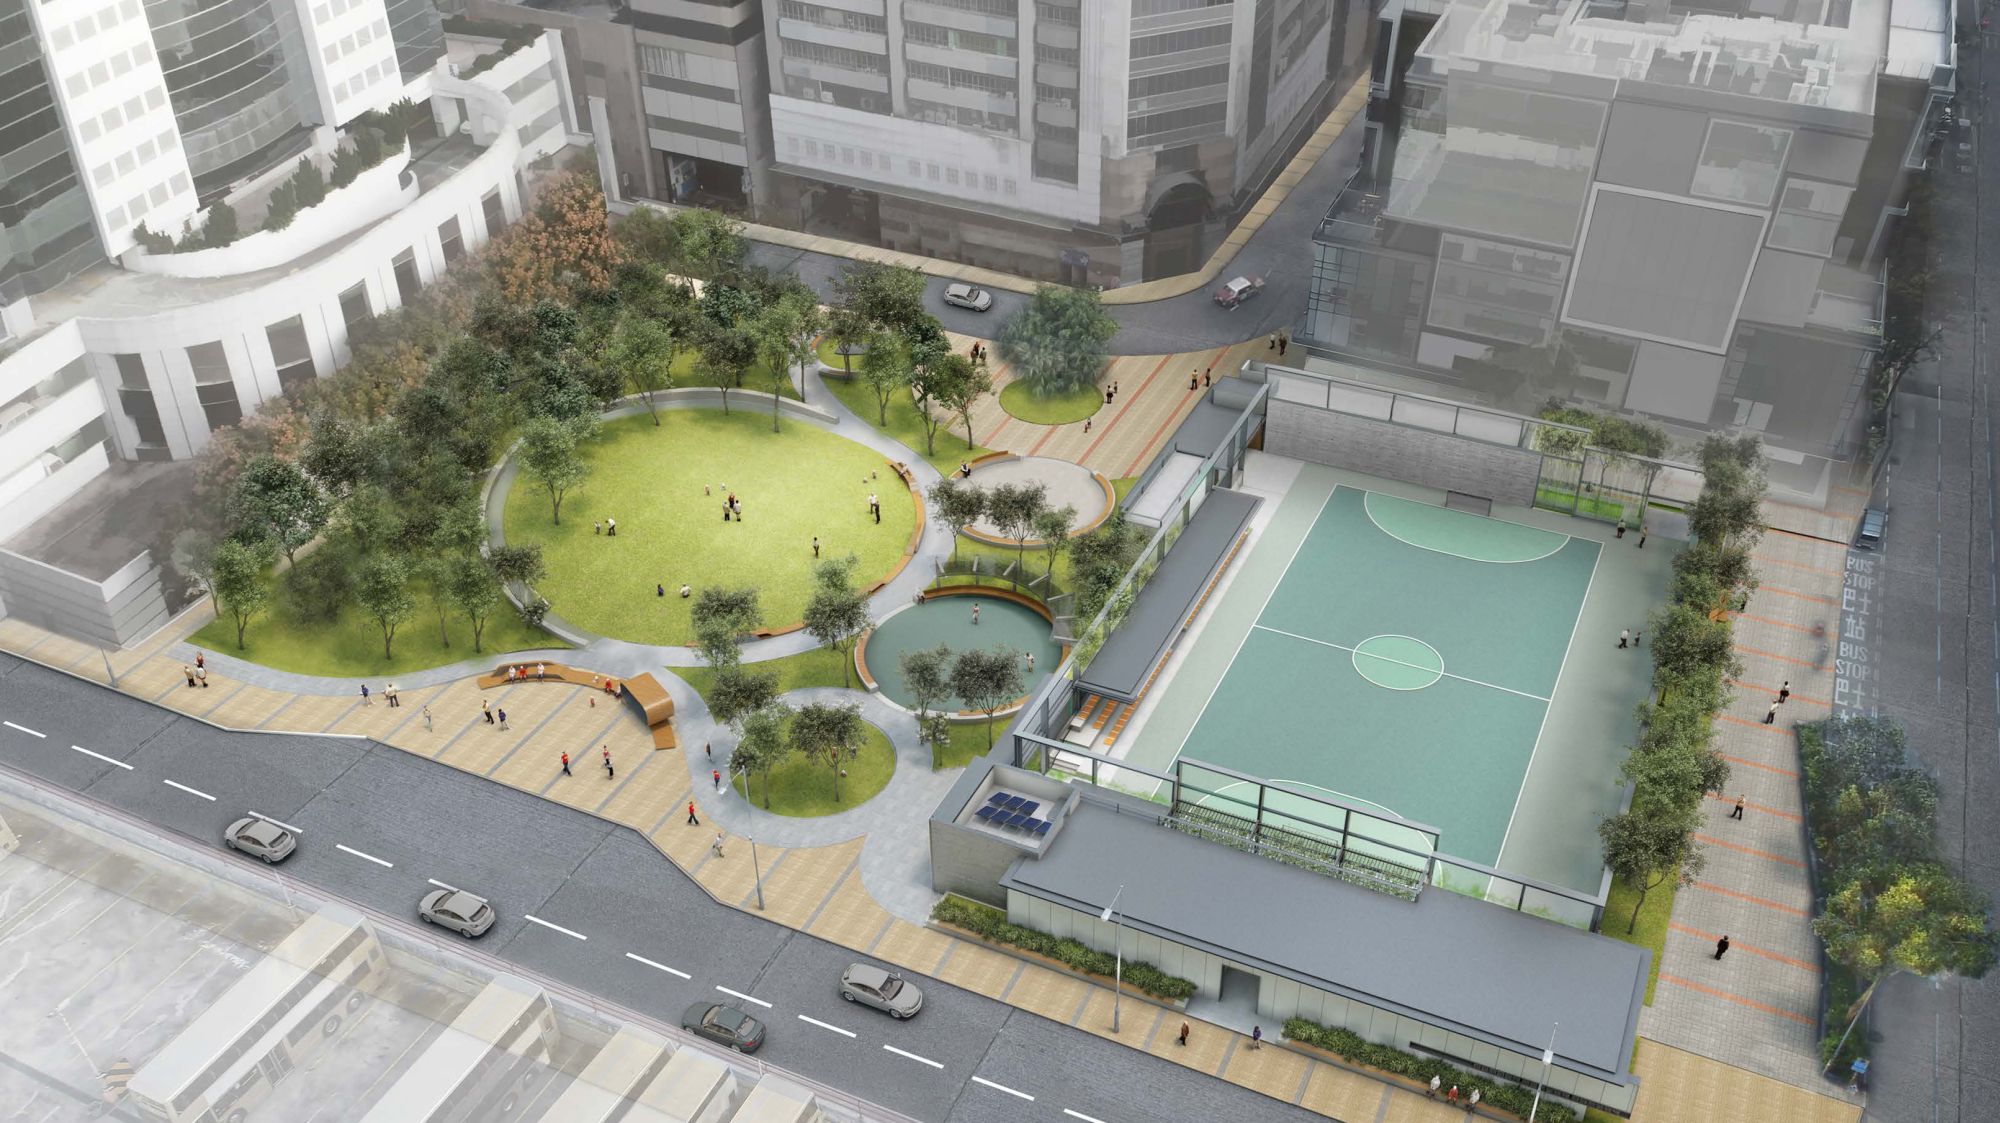 More public open space projects will be completed in KE in the coming years, including improvement of Lam Wah Street Playground and the revitalisation of Tsui Ping River. The picture shows an artist’s impression of the improvement of Lam Wah Street Playground upon completion.